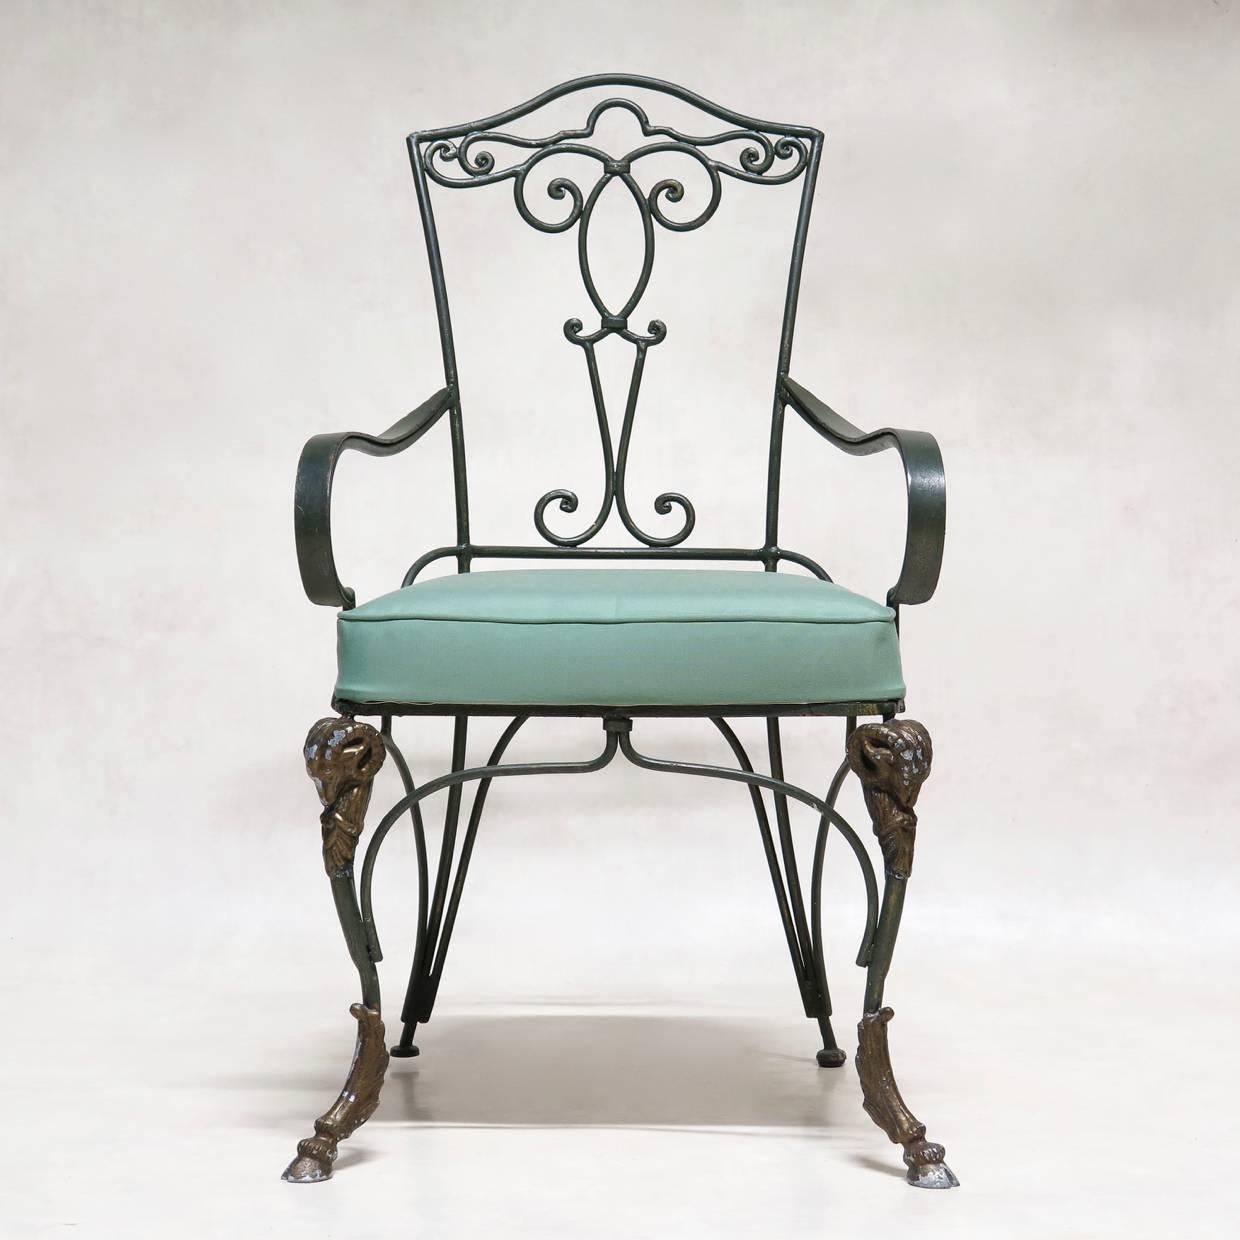 Set of four elegant chairs inspired by the 1940s, painted dark green with bronze highlights. The front legs feature striking rams head detailing on the knees and end in cloven hooves. The back legs extend gracefully outwards. Gently curved armrests.